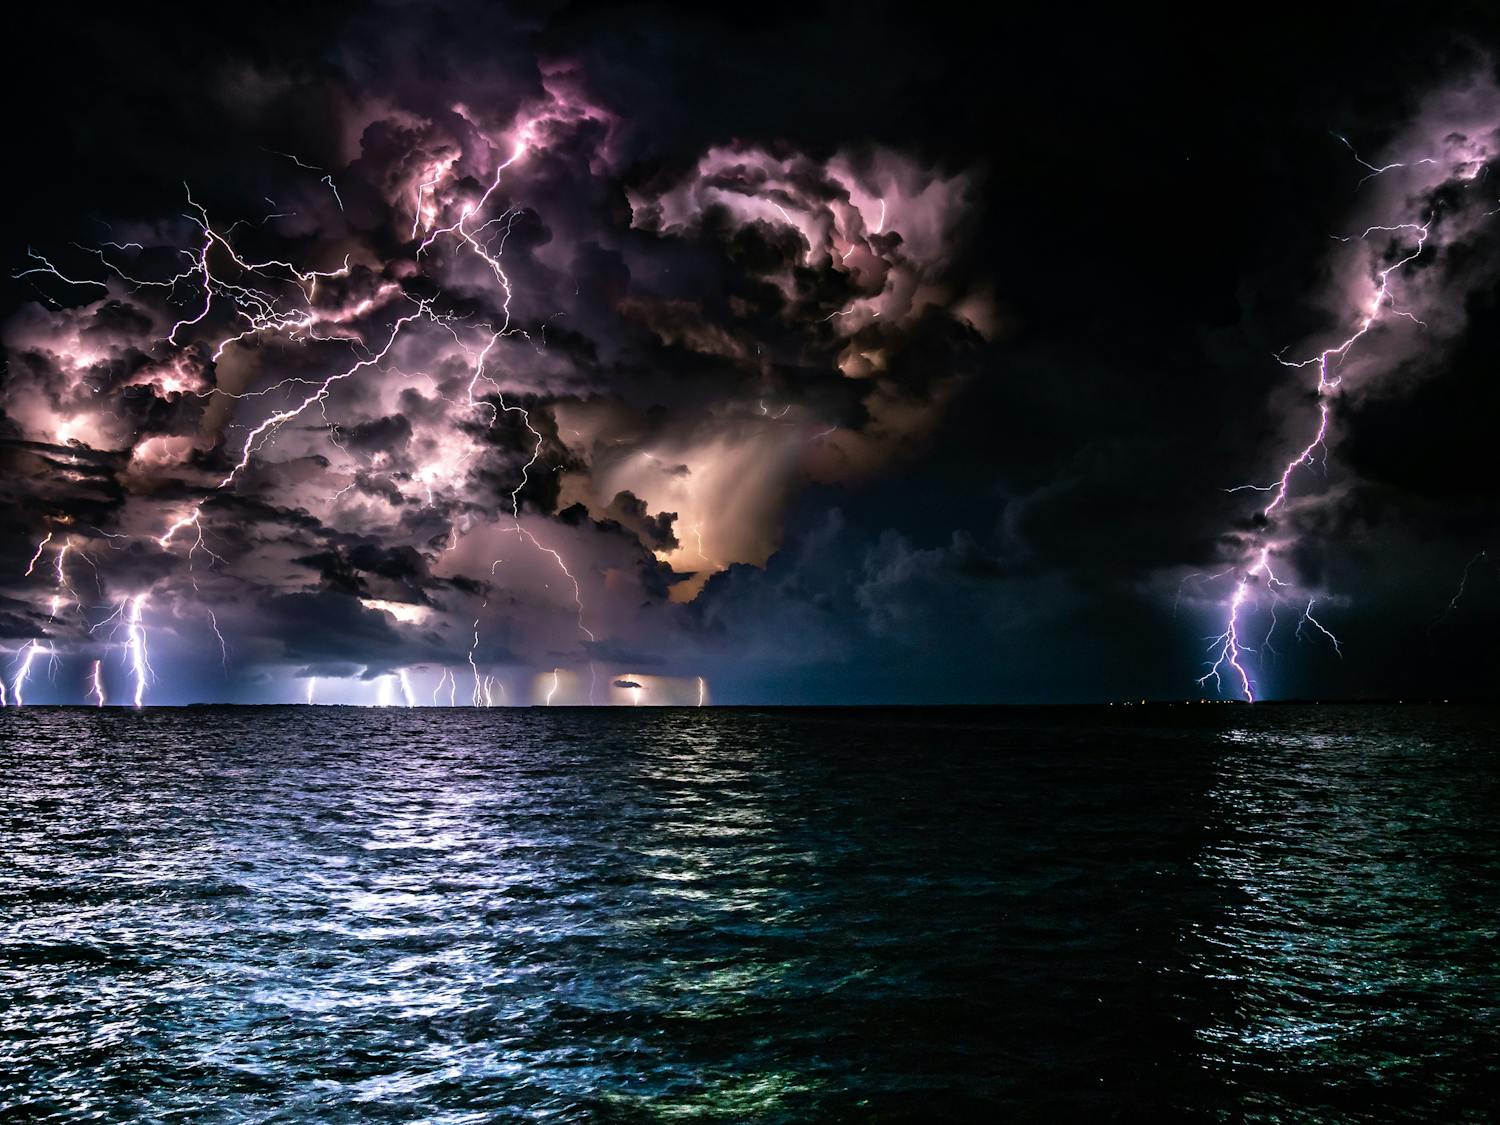 Many lightening strikes in a stormy sky overlooking the ocean